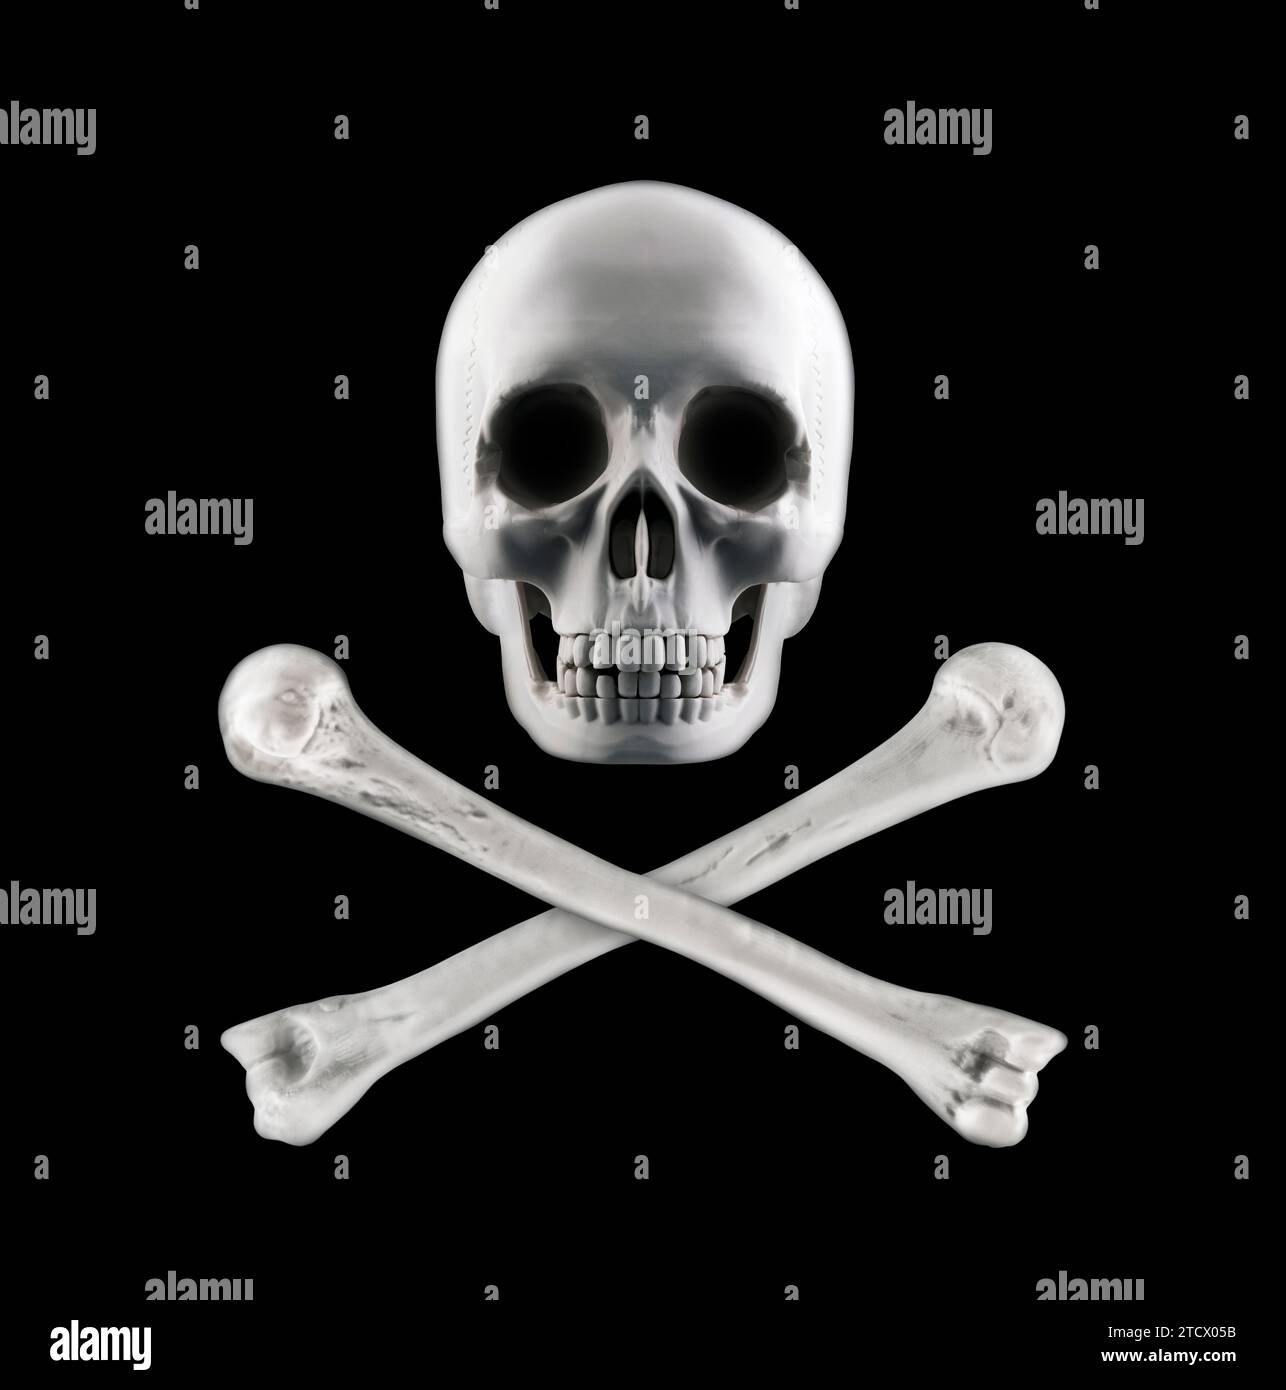 Human skull with crossed bones isolated on black background, pirate flag Stock Photo